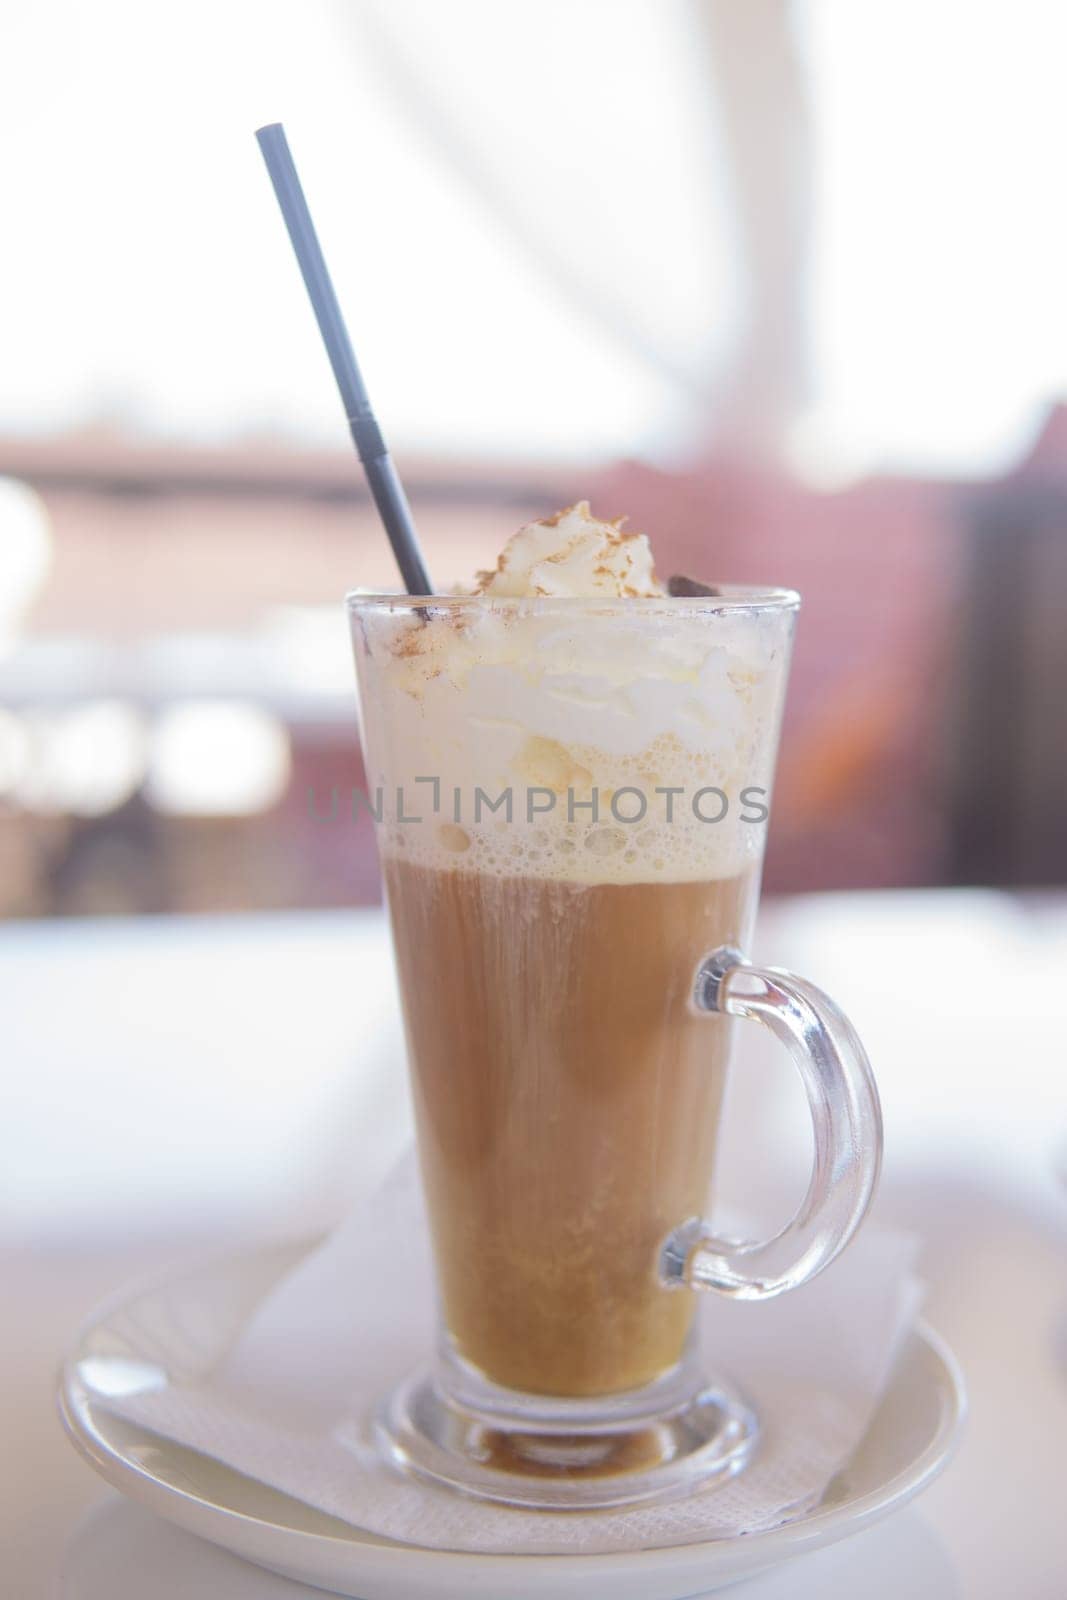 coffee is served in a tall glass glass with a straw. The concept of coffee drinks from the bar menu by Annu1tochka